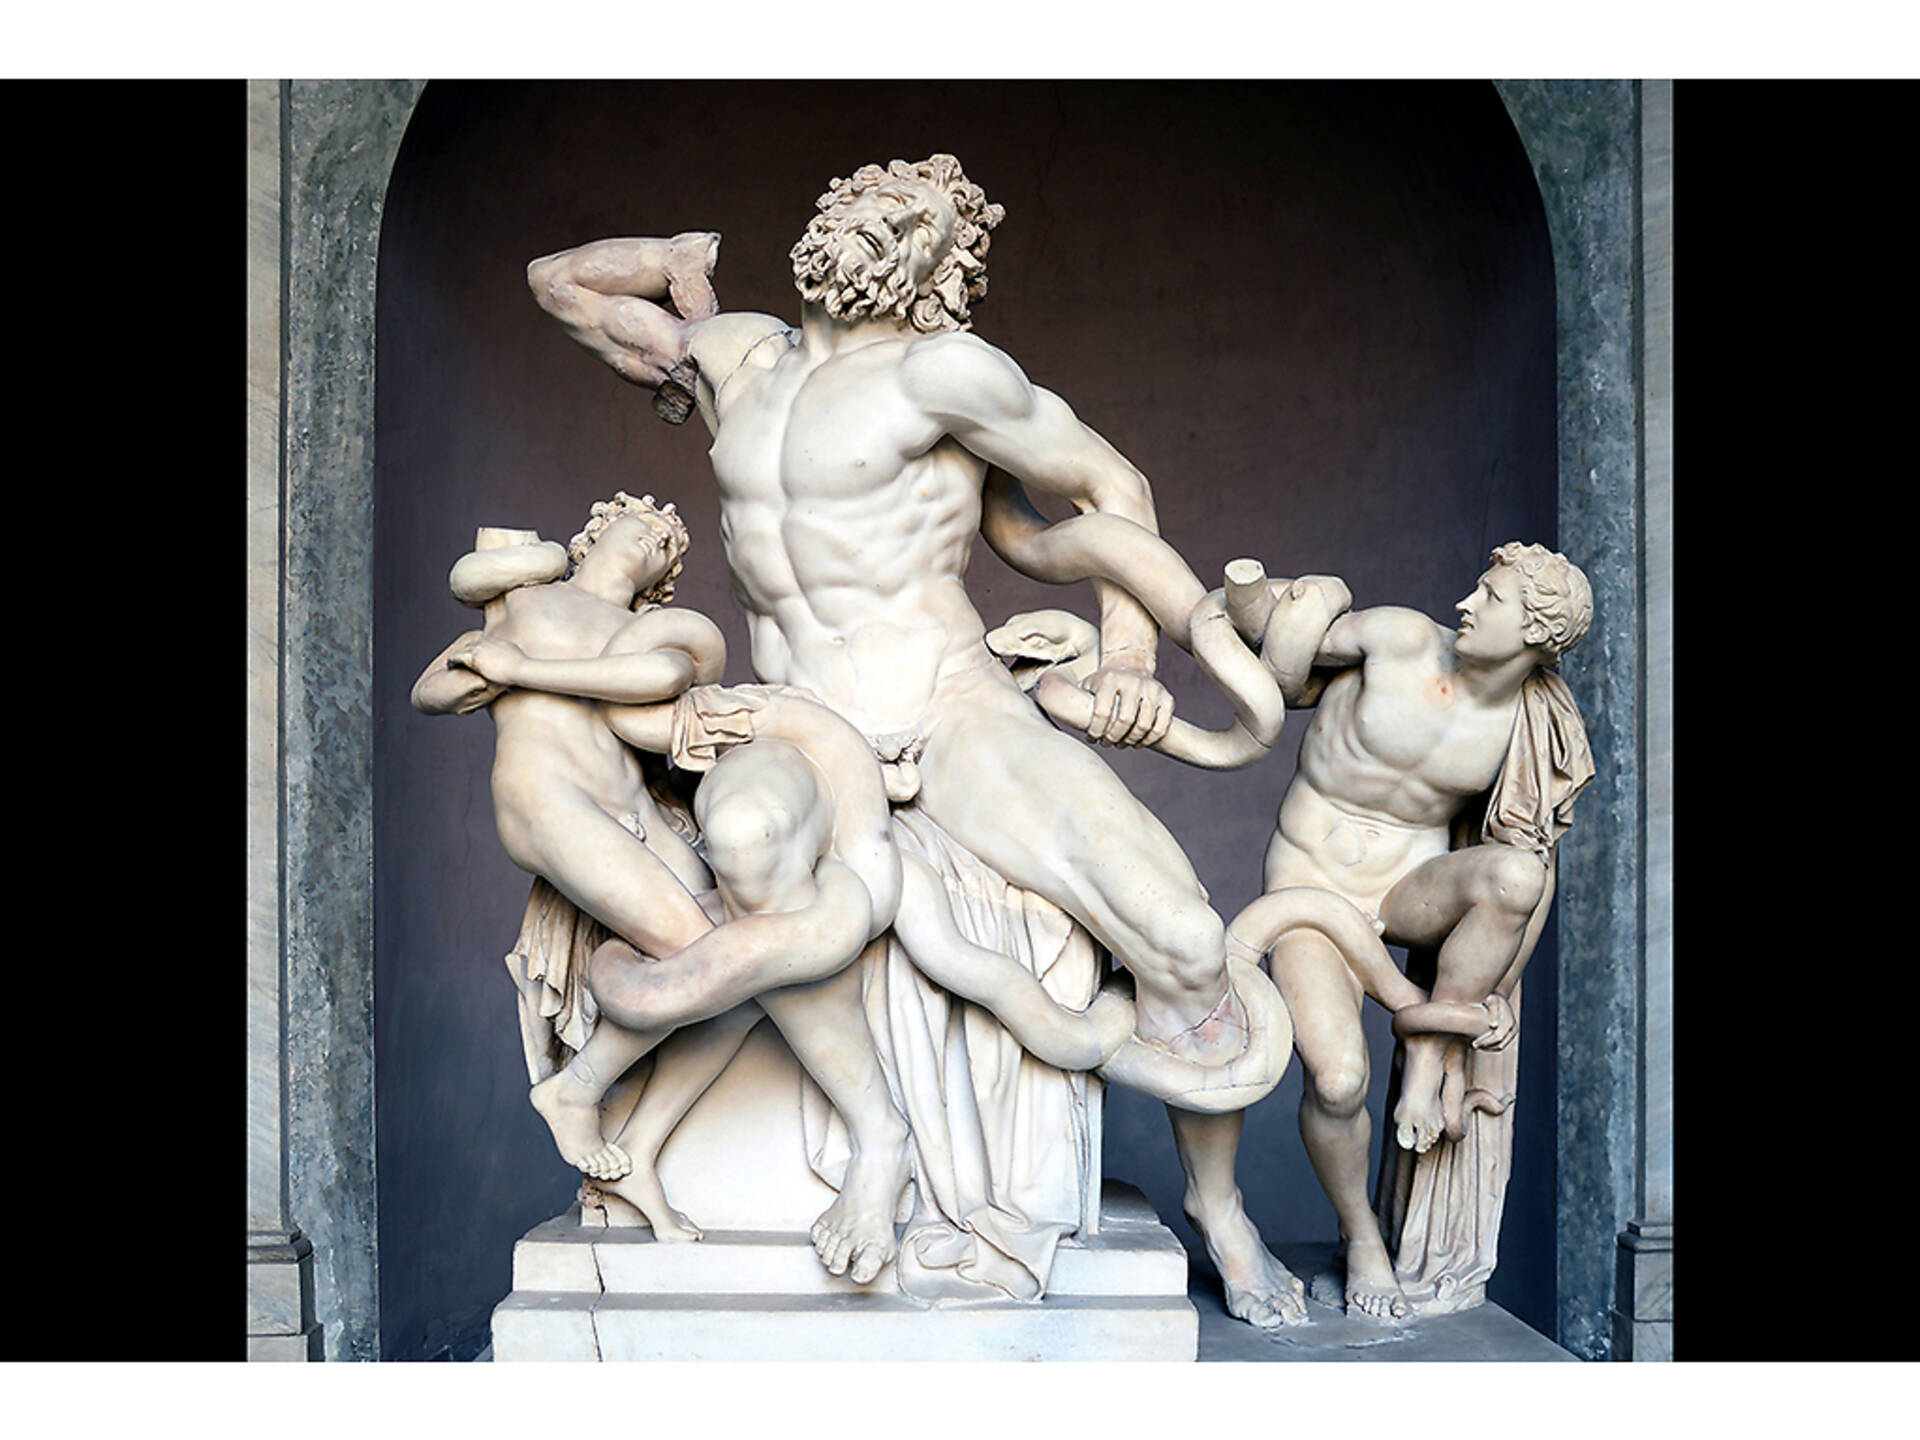 The top famous sculptures of all time